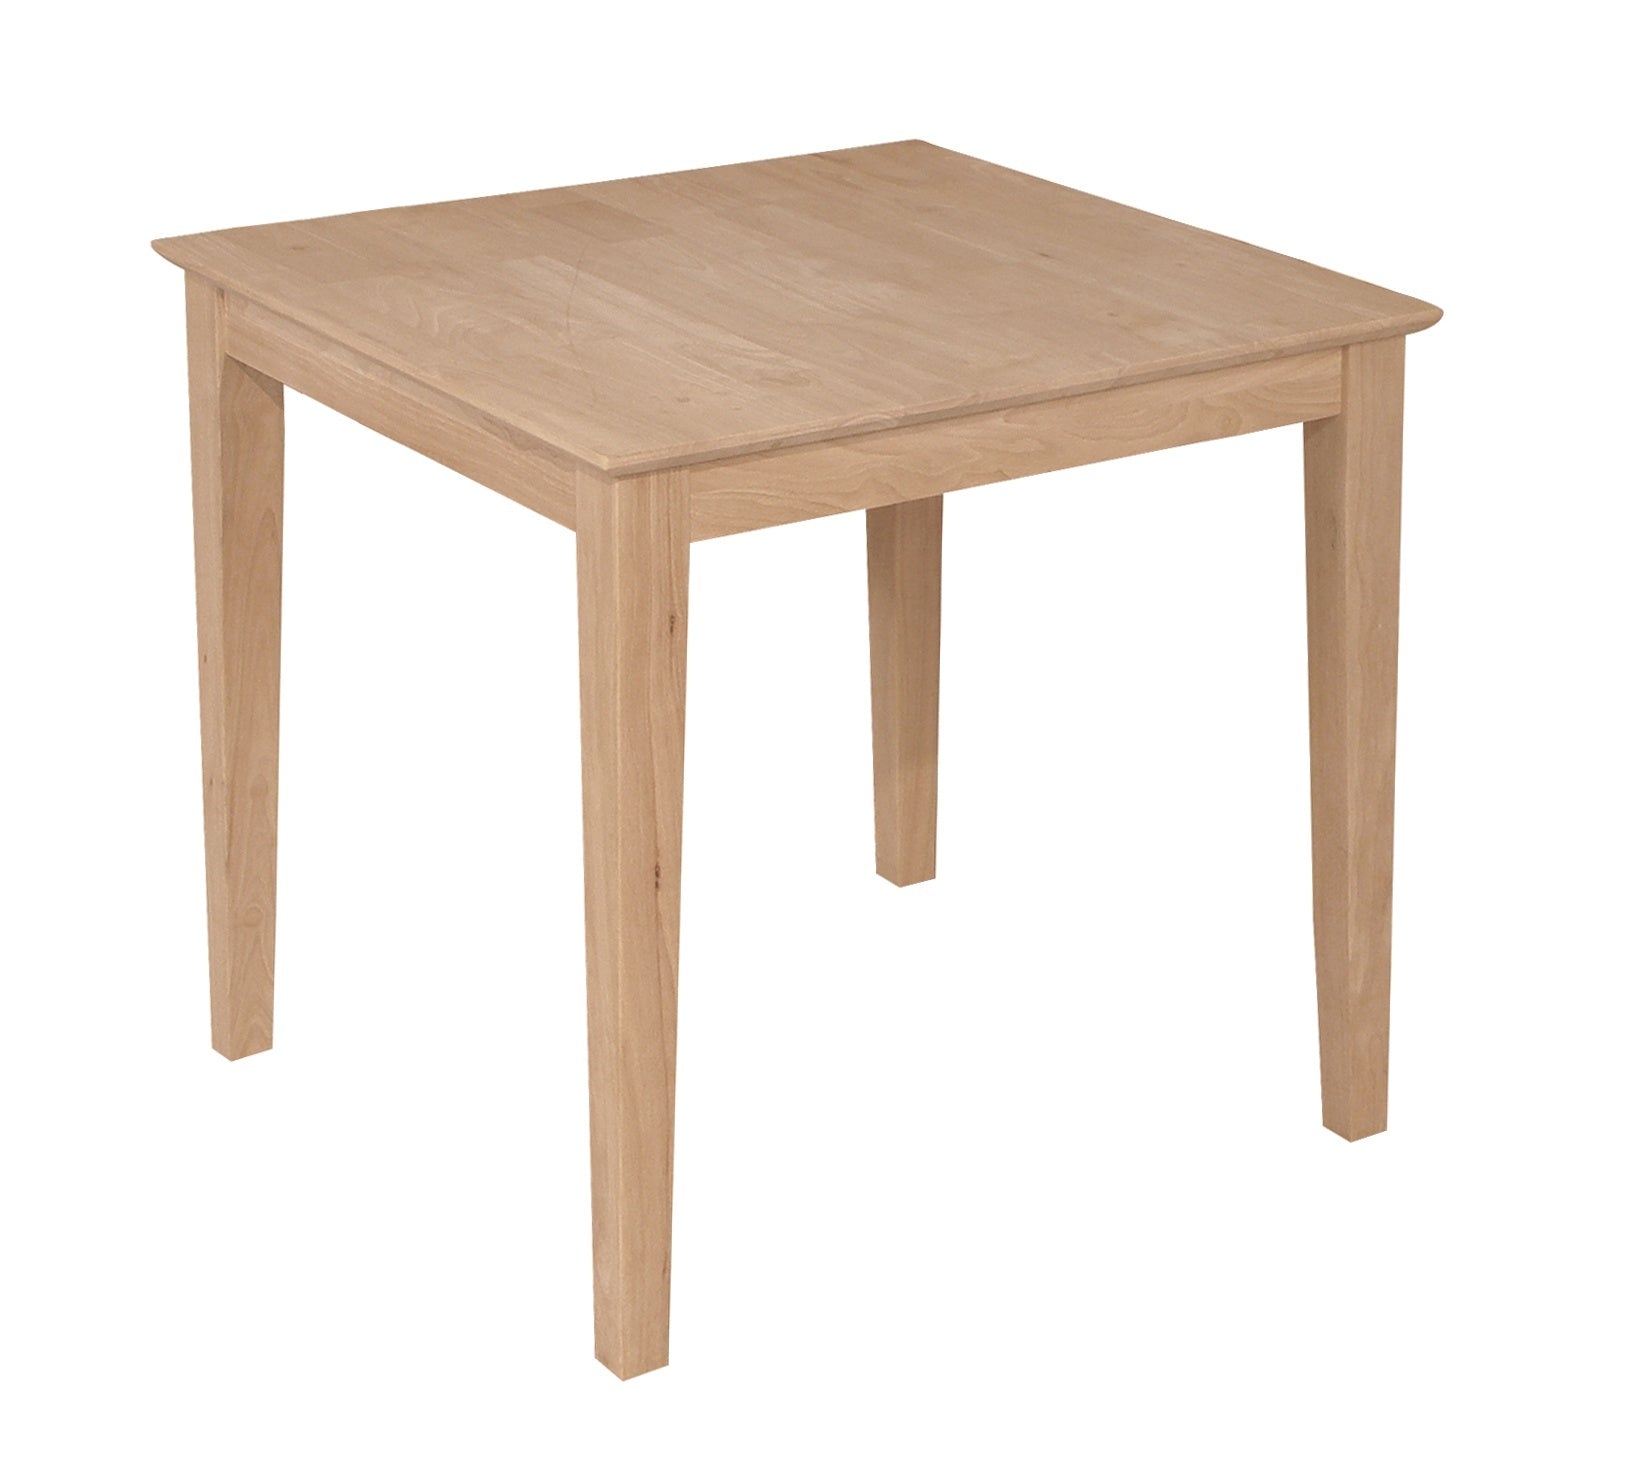 [30 Inch] Modern Farm Dining Table with T-30S Legs